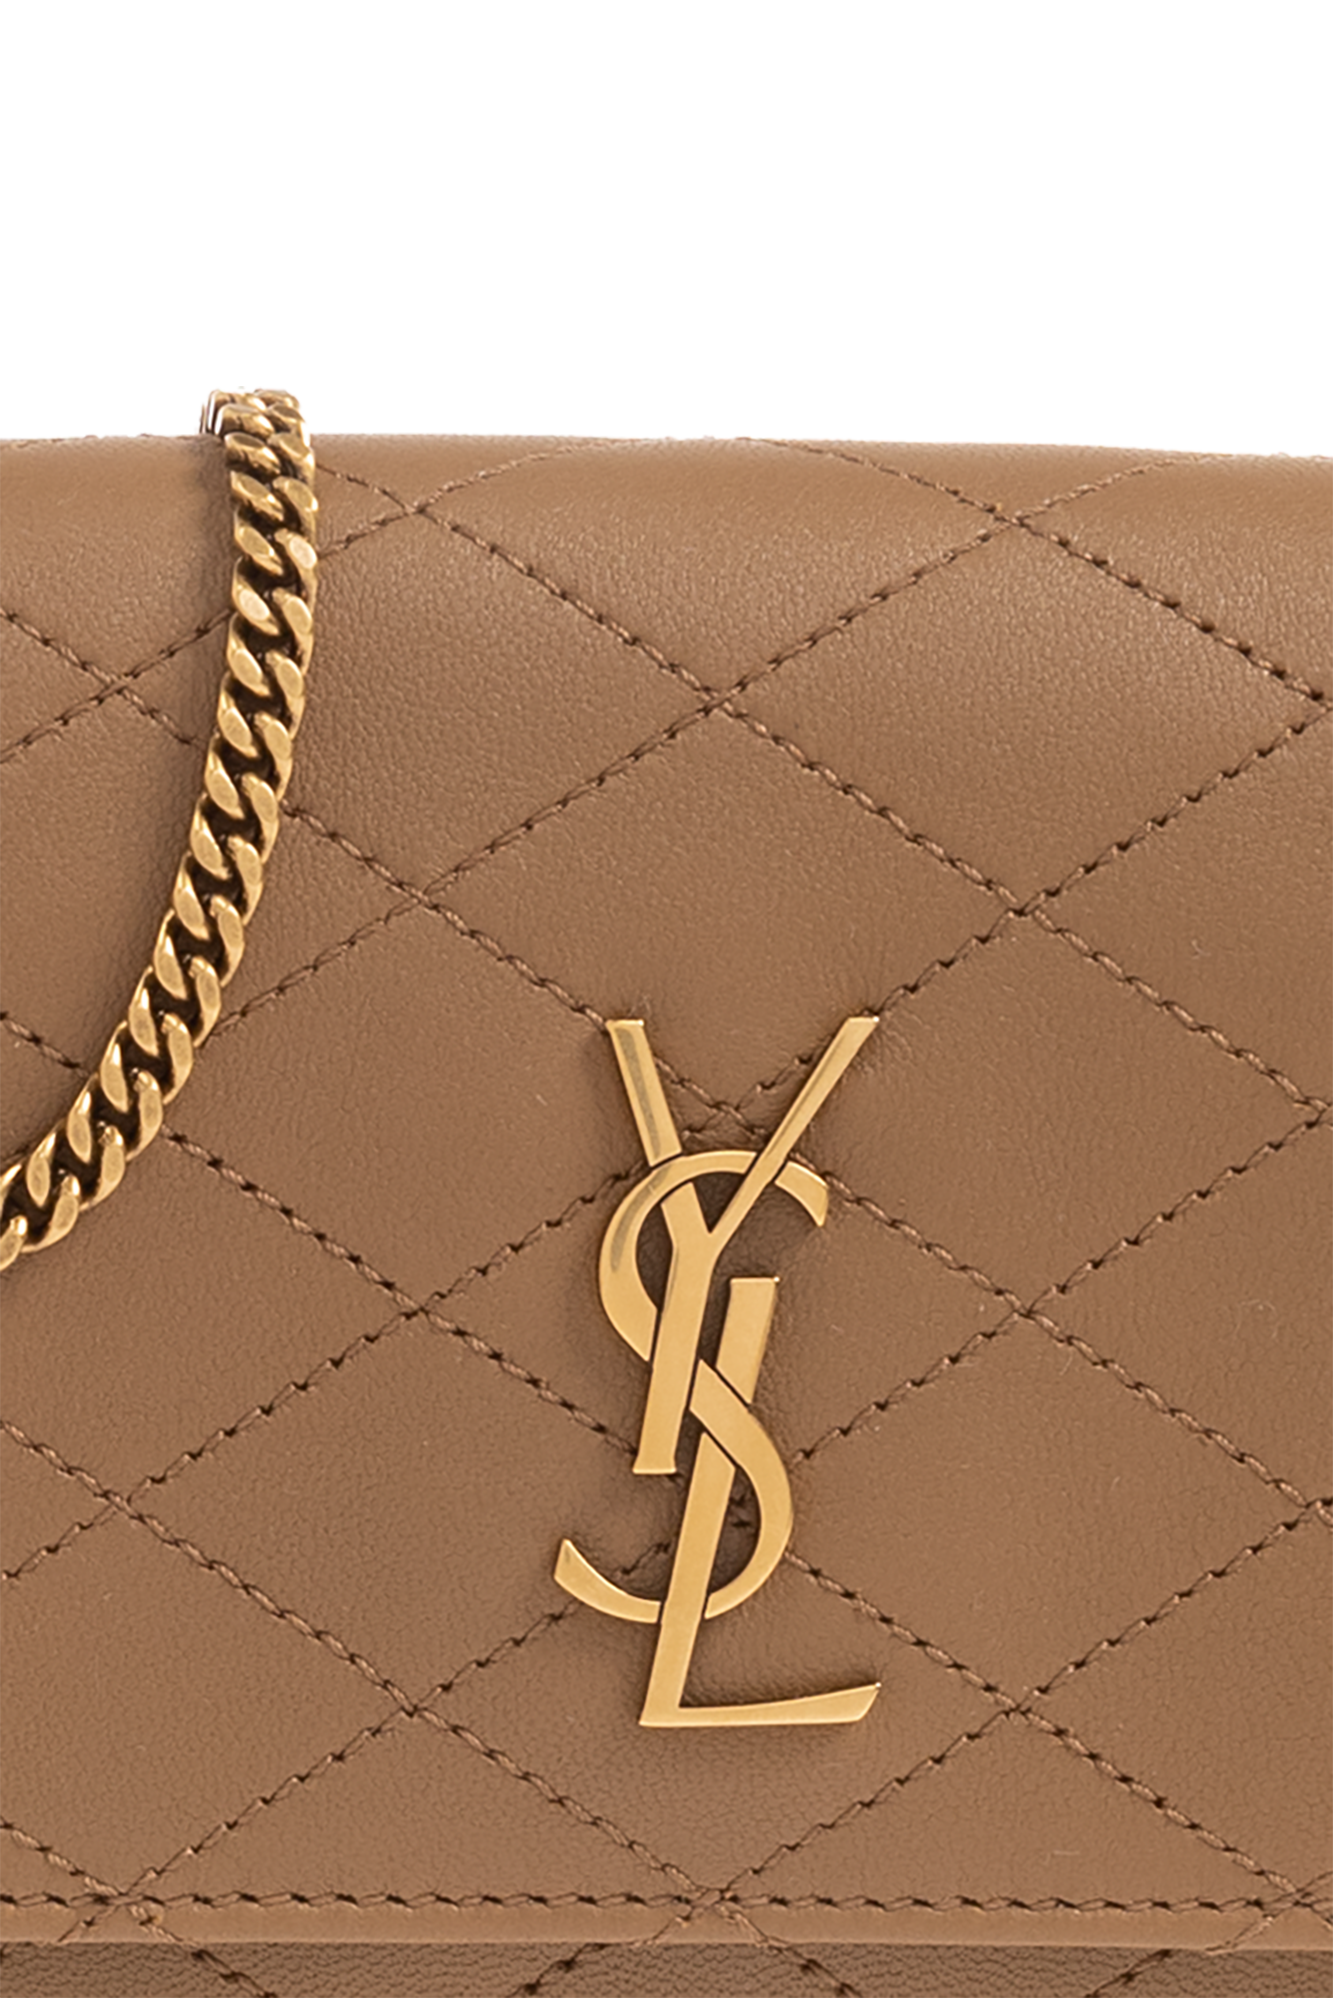 Saint Laurent ‘Gaby’ phone pouch with chain